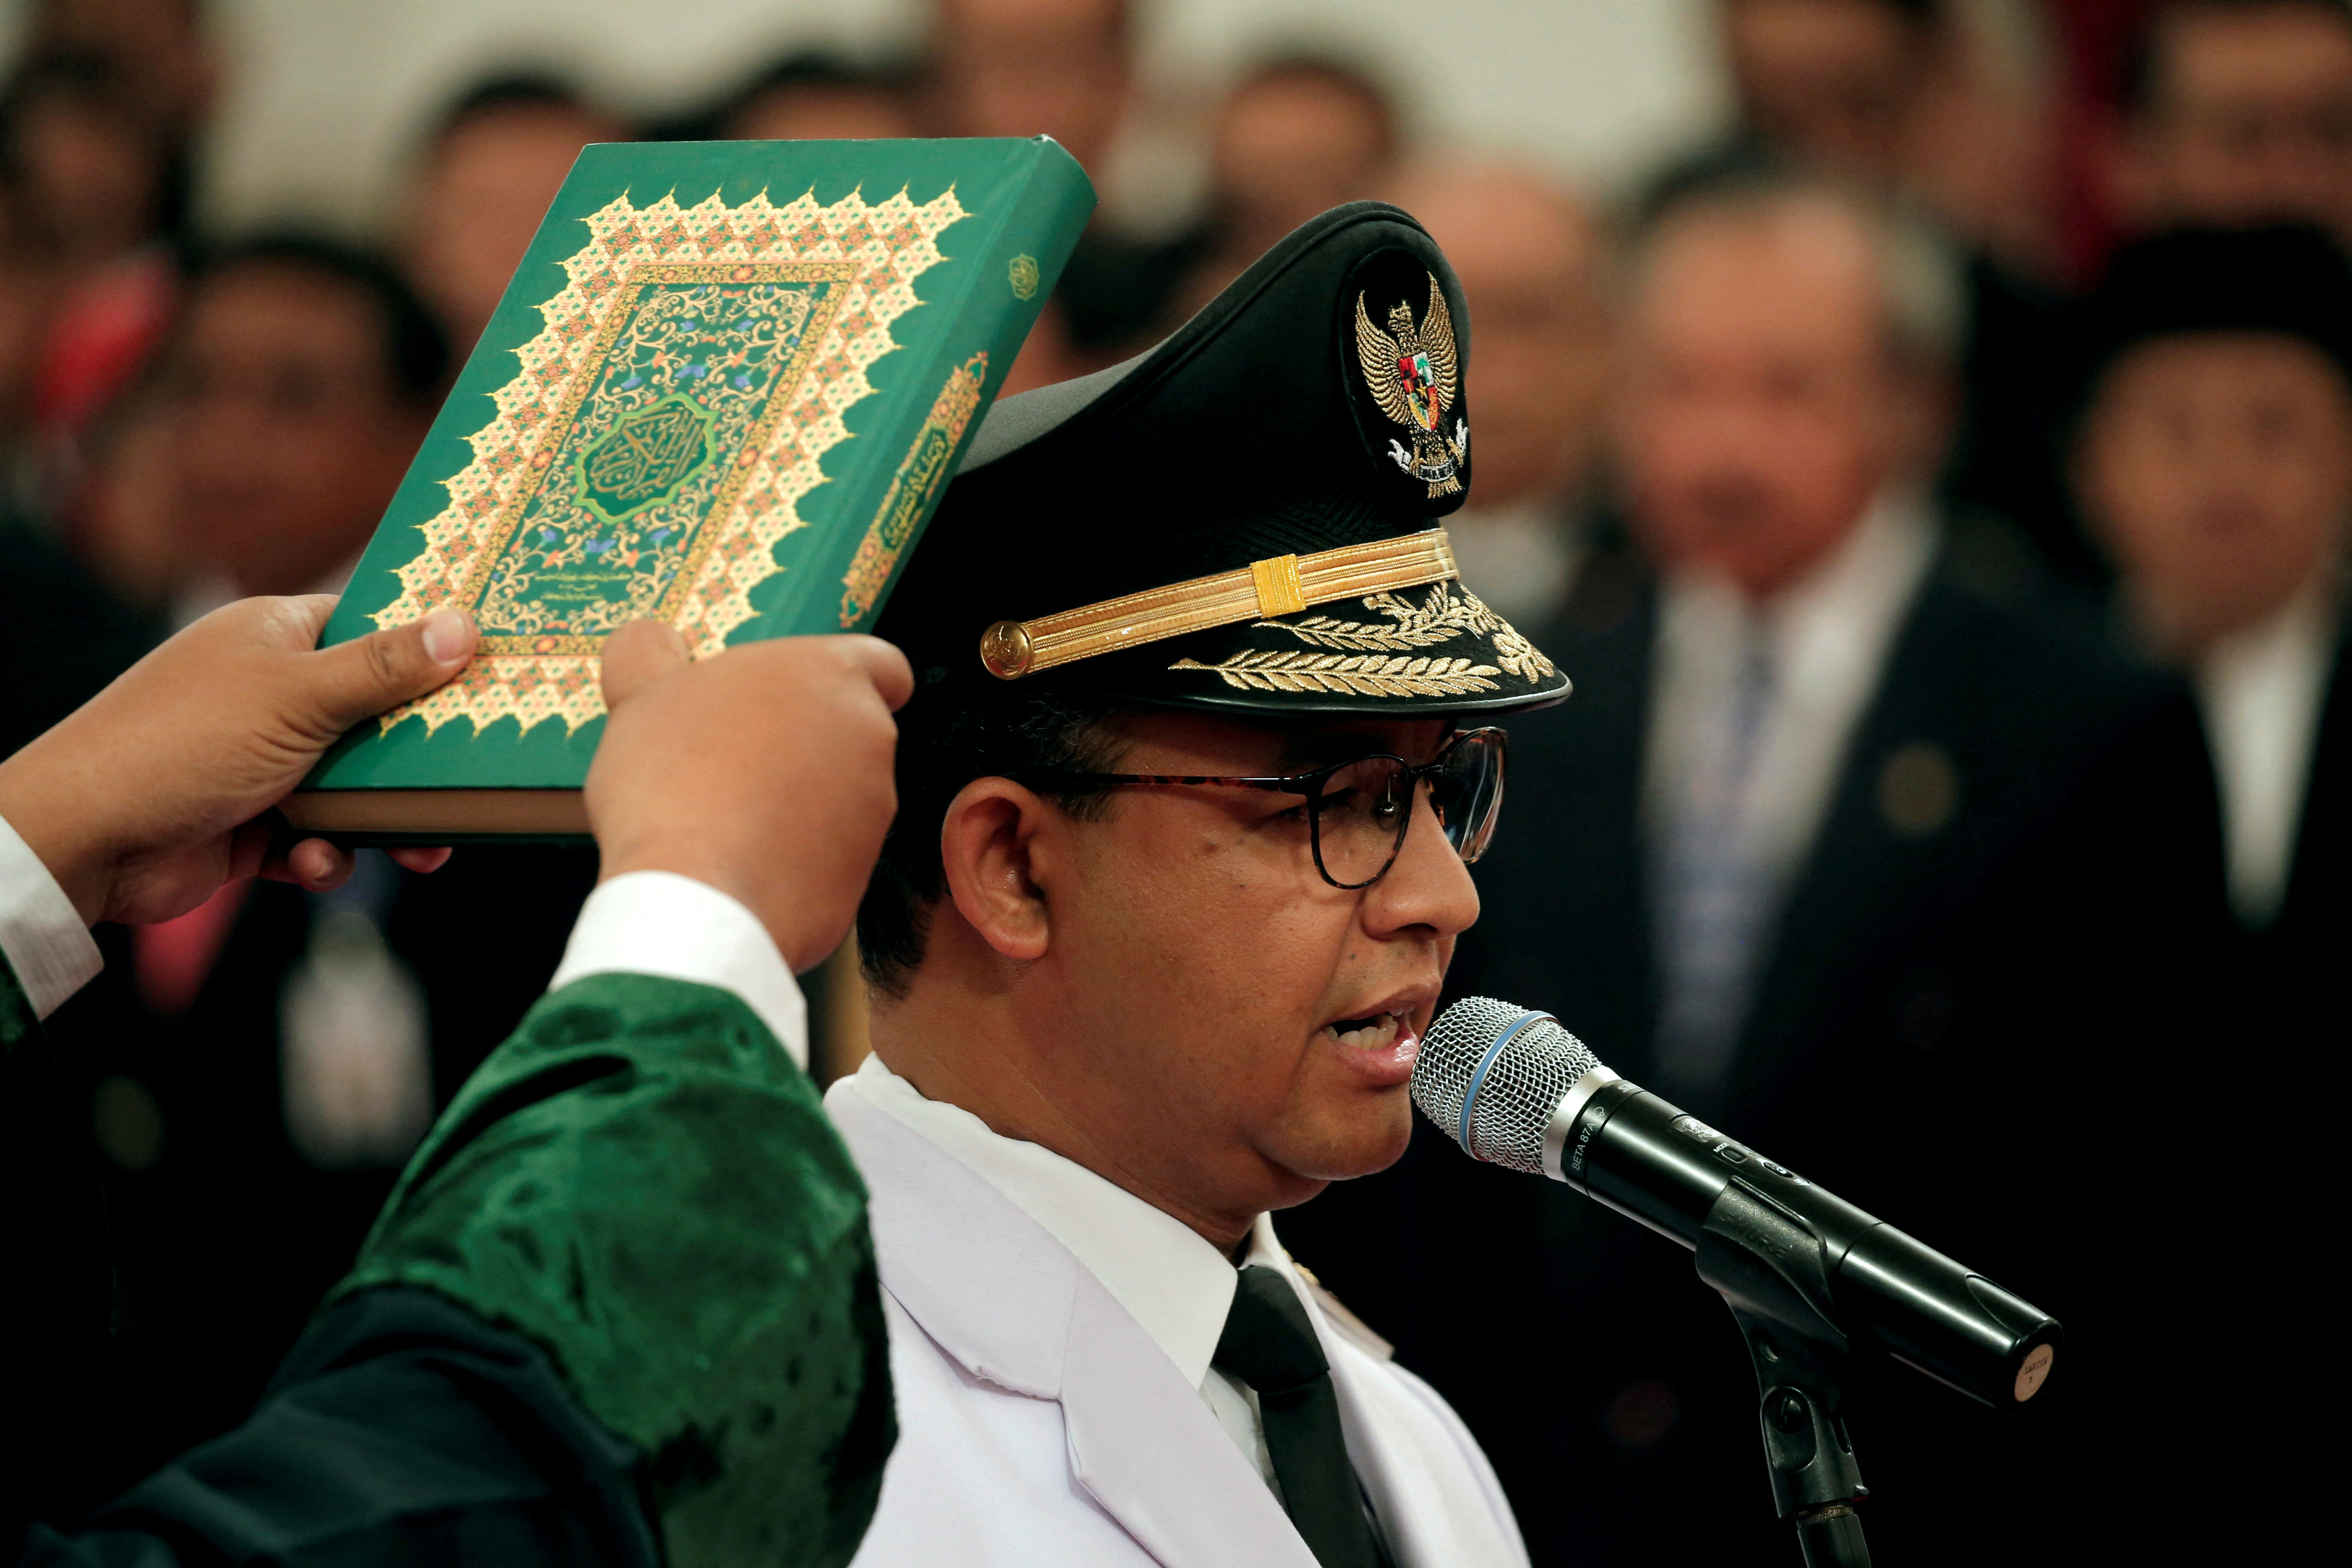 A man holds a Koran as Jakarta Governor Anies Baswedan stands during a swearing-in ceremony at the Presidential Palace in Jakarta